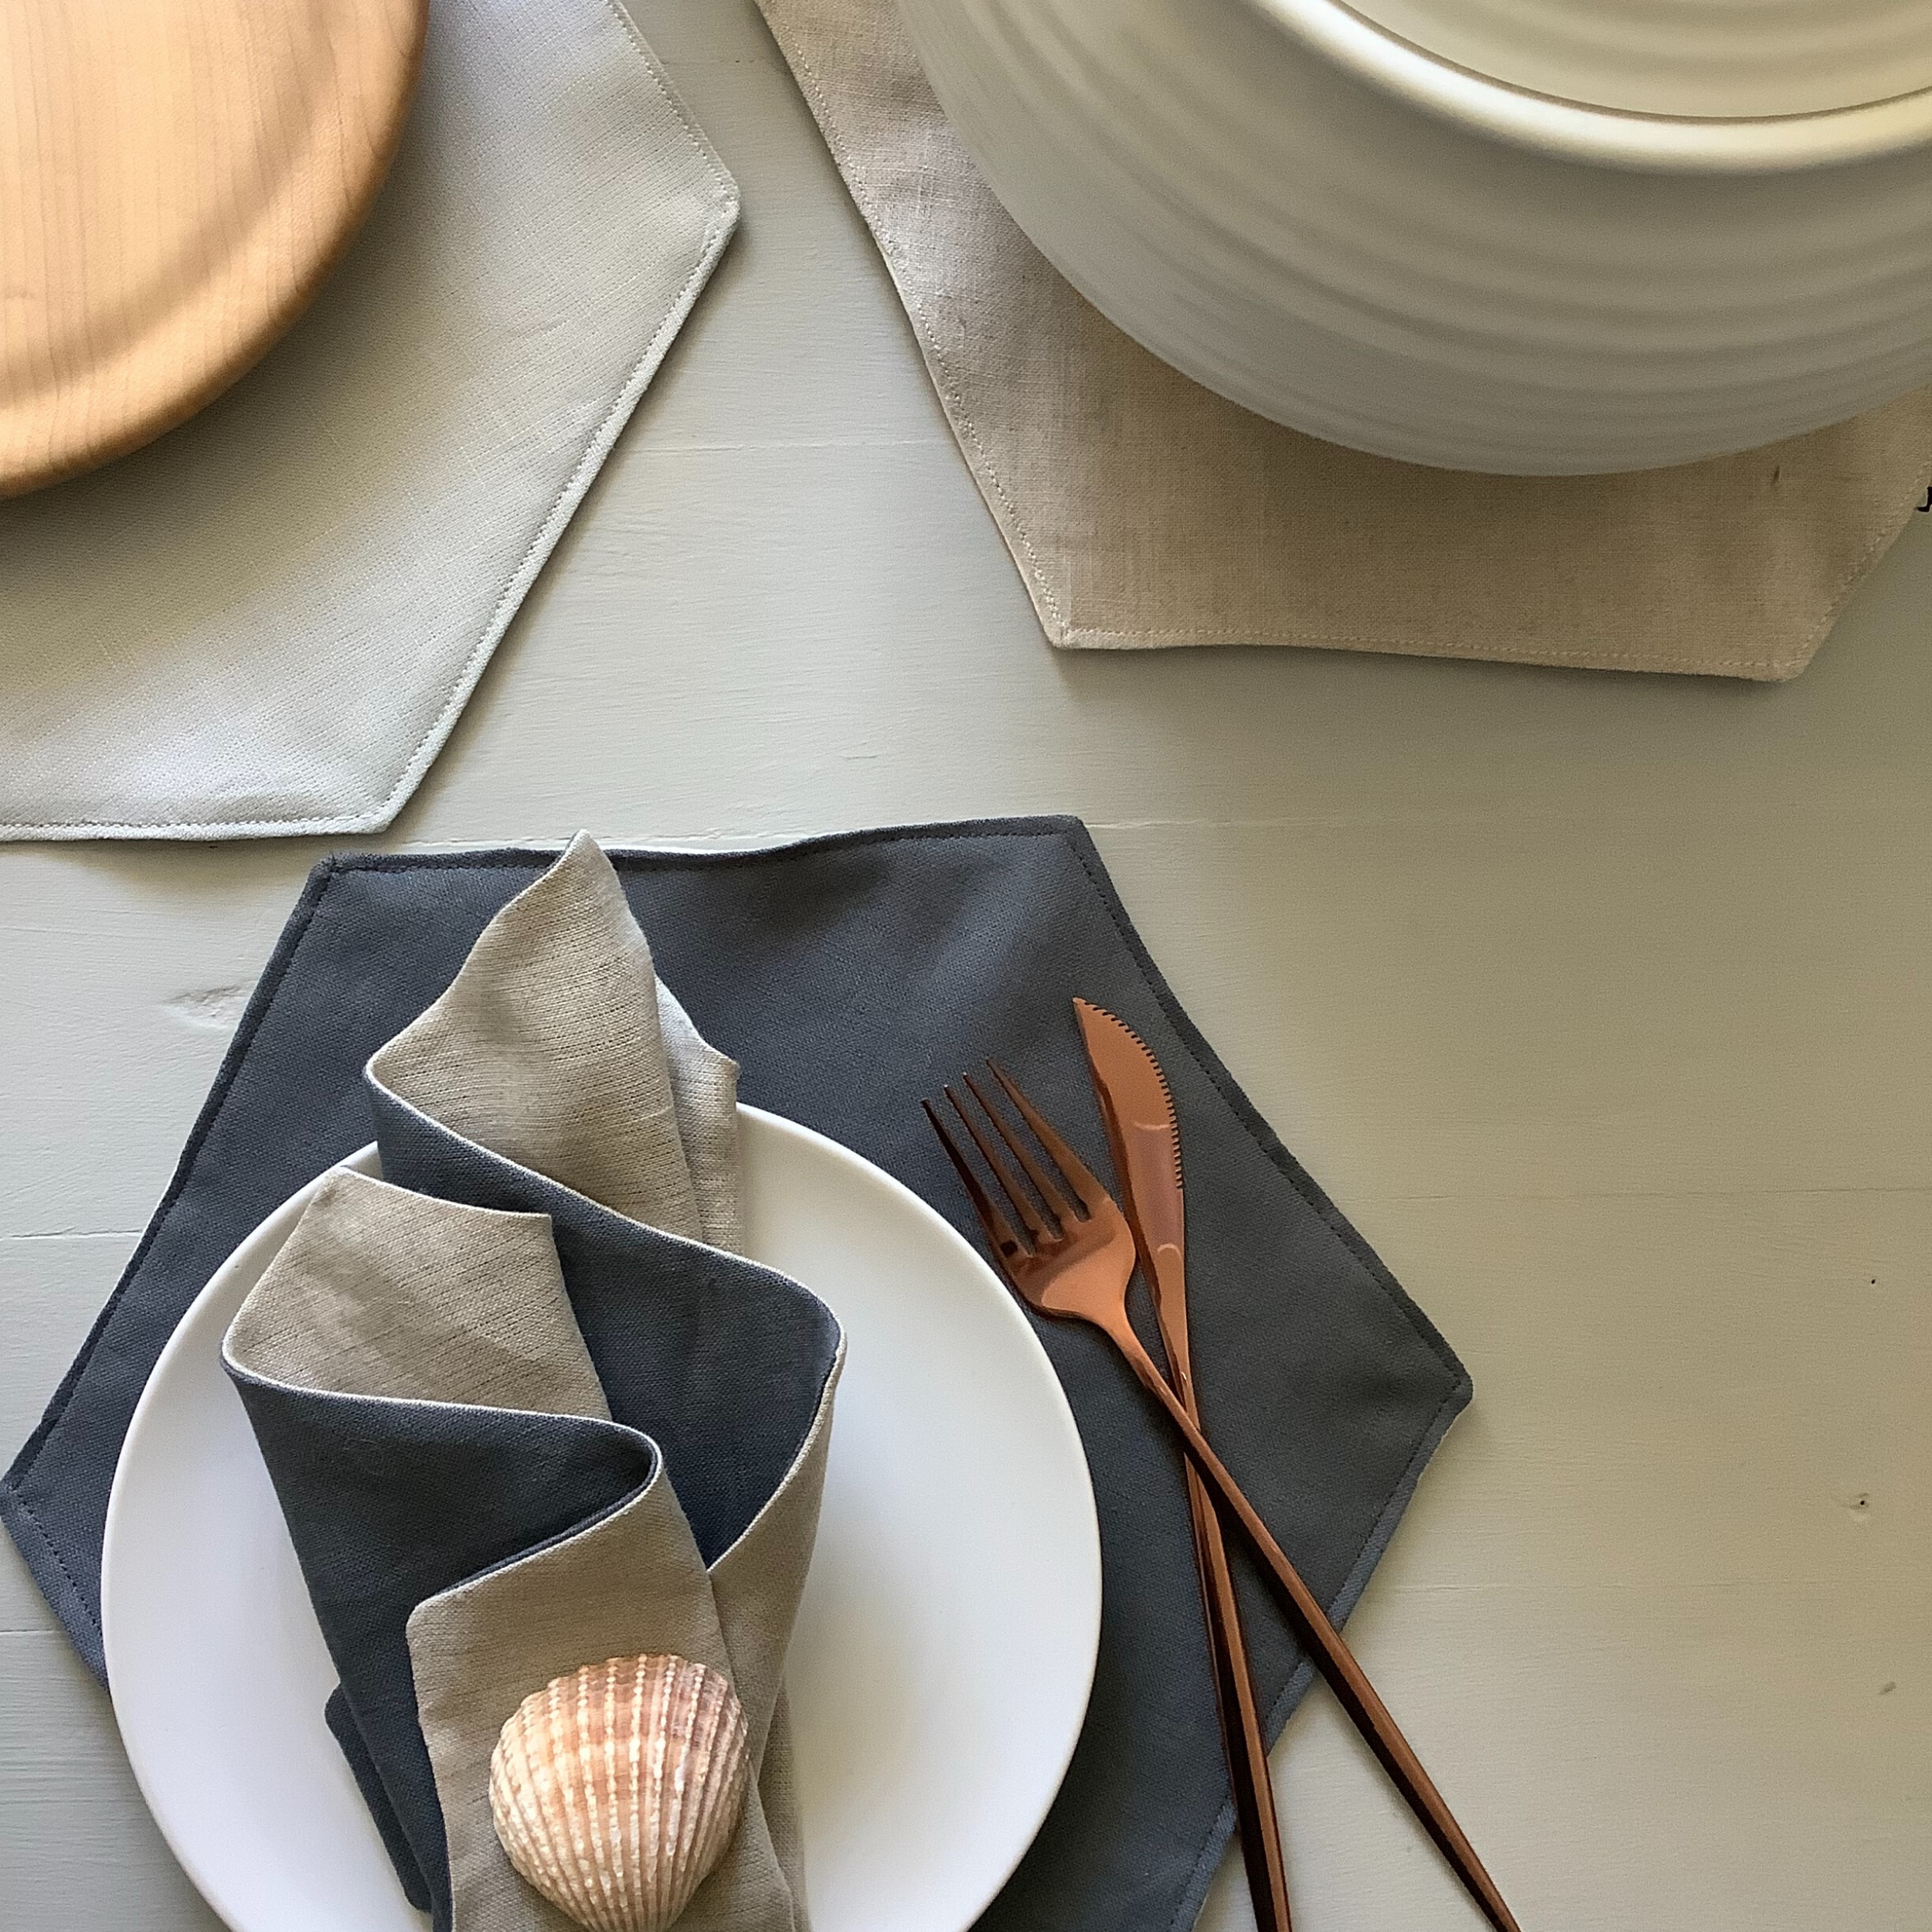 Photo showing the Borage Table Mats, Cup Mats and Napkins sewing pattern from Lasenby Patterns on The Fold Line. A table mat, cup mat and napkin pattern made in canvas, linen, lawn, cottons or twill fabrics, featuring two tone hexagonal mats and napkin, a set of mats forms a table runner.